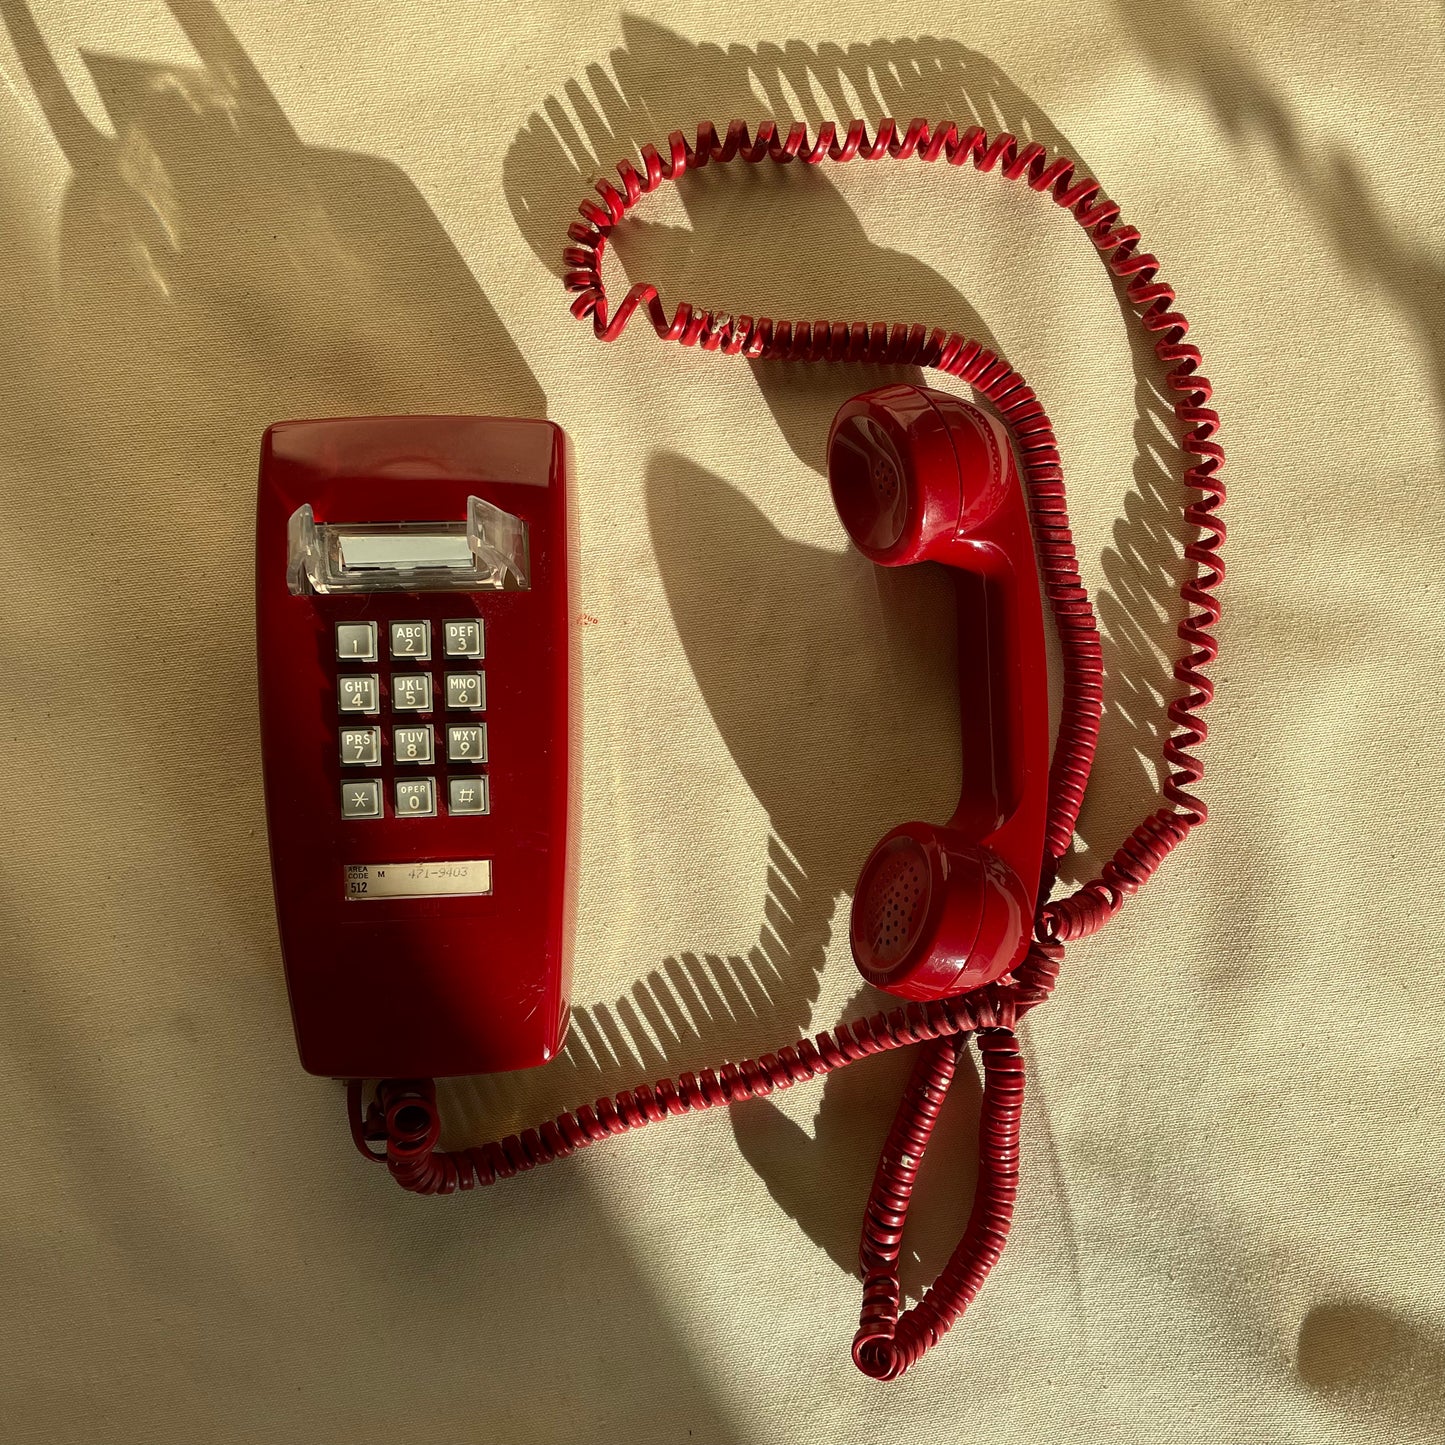 Vintage Red Telephone, Wall Hung